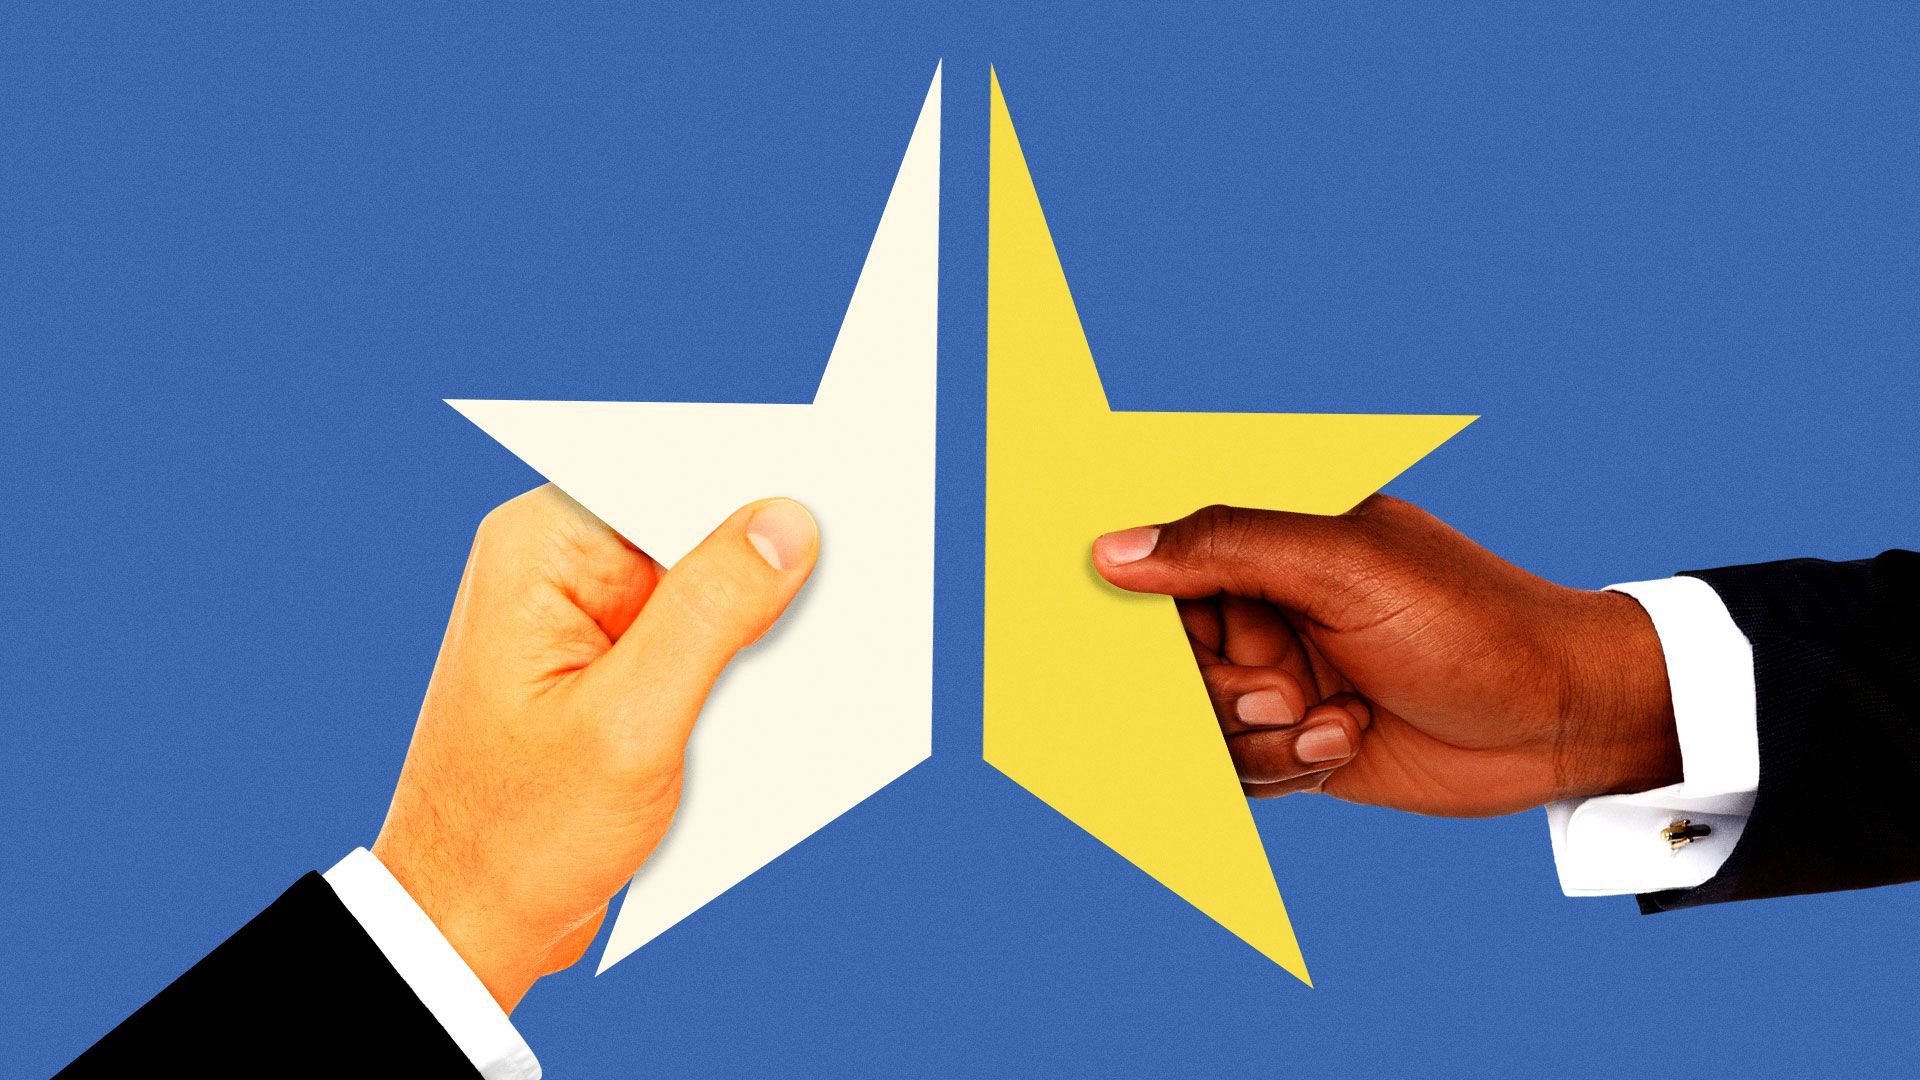 Illustration of two different hands joining together a white and yellow star